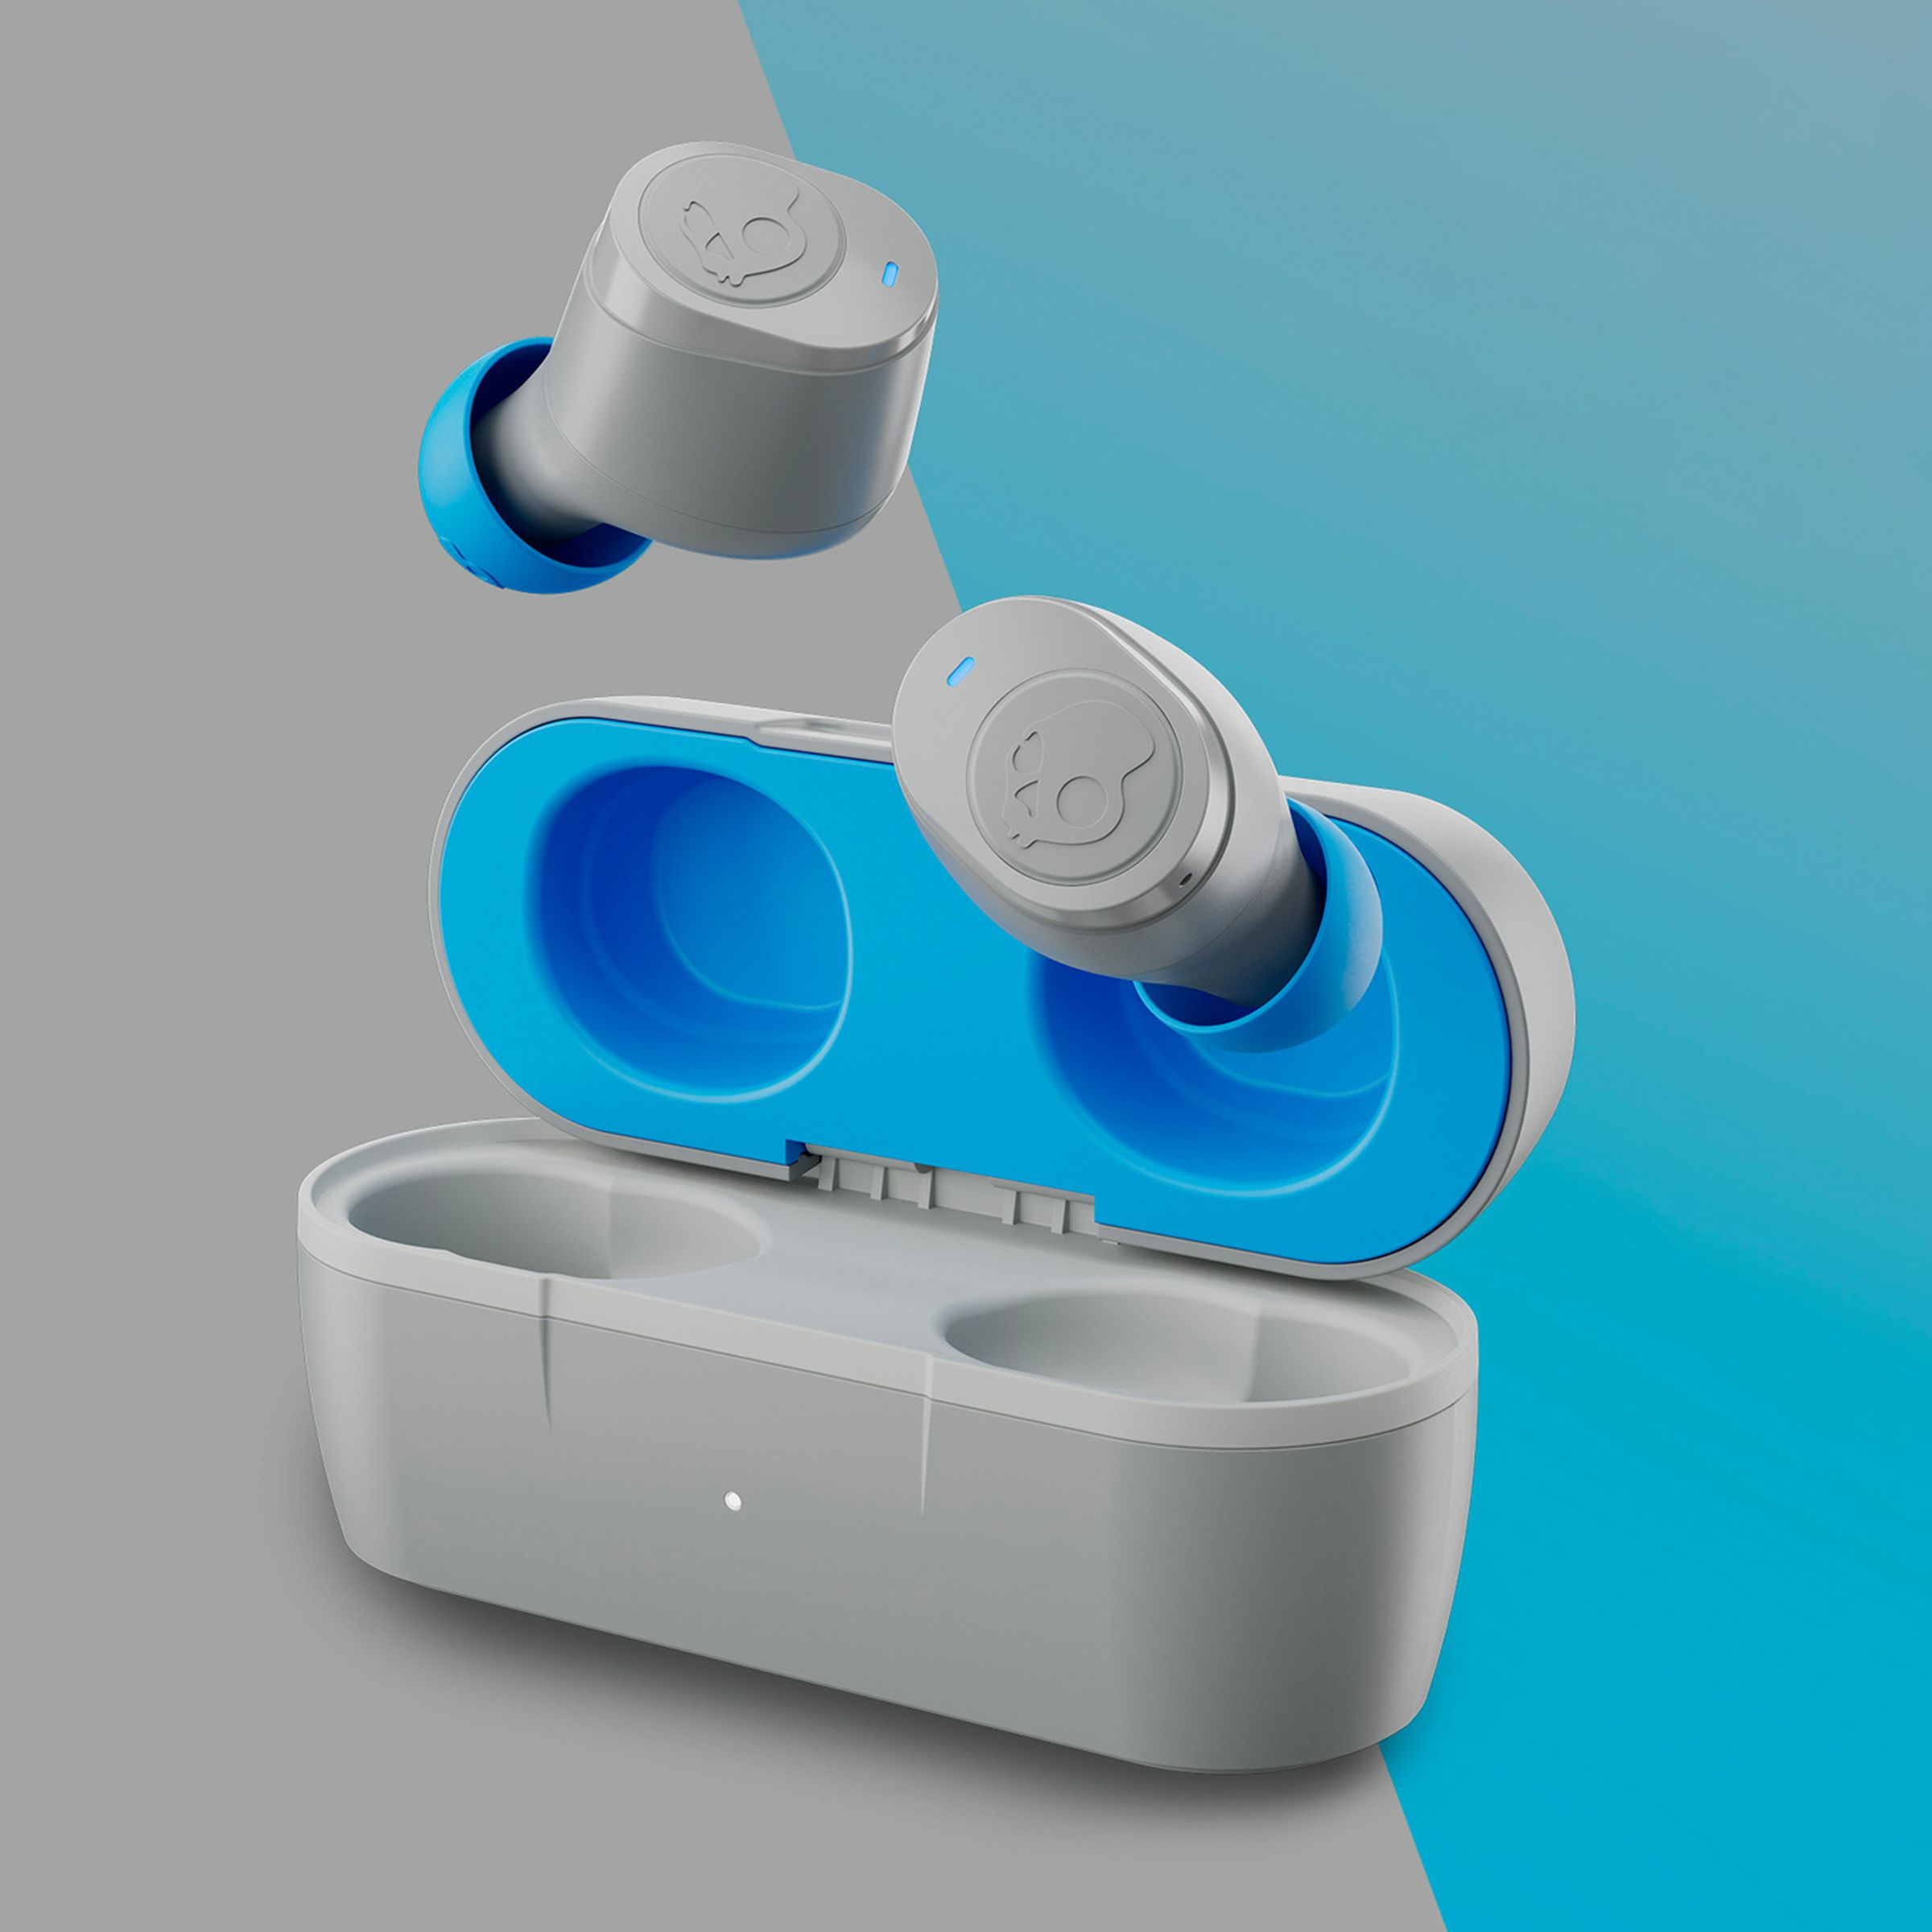 The Skullcandy Jib True 2 wireless earbuds in gray and light blue colorway with their color-matched case.